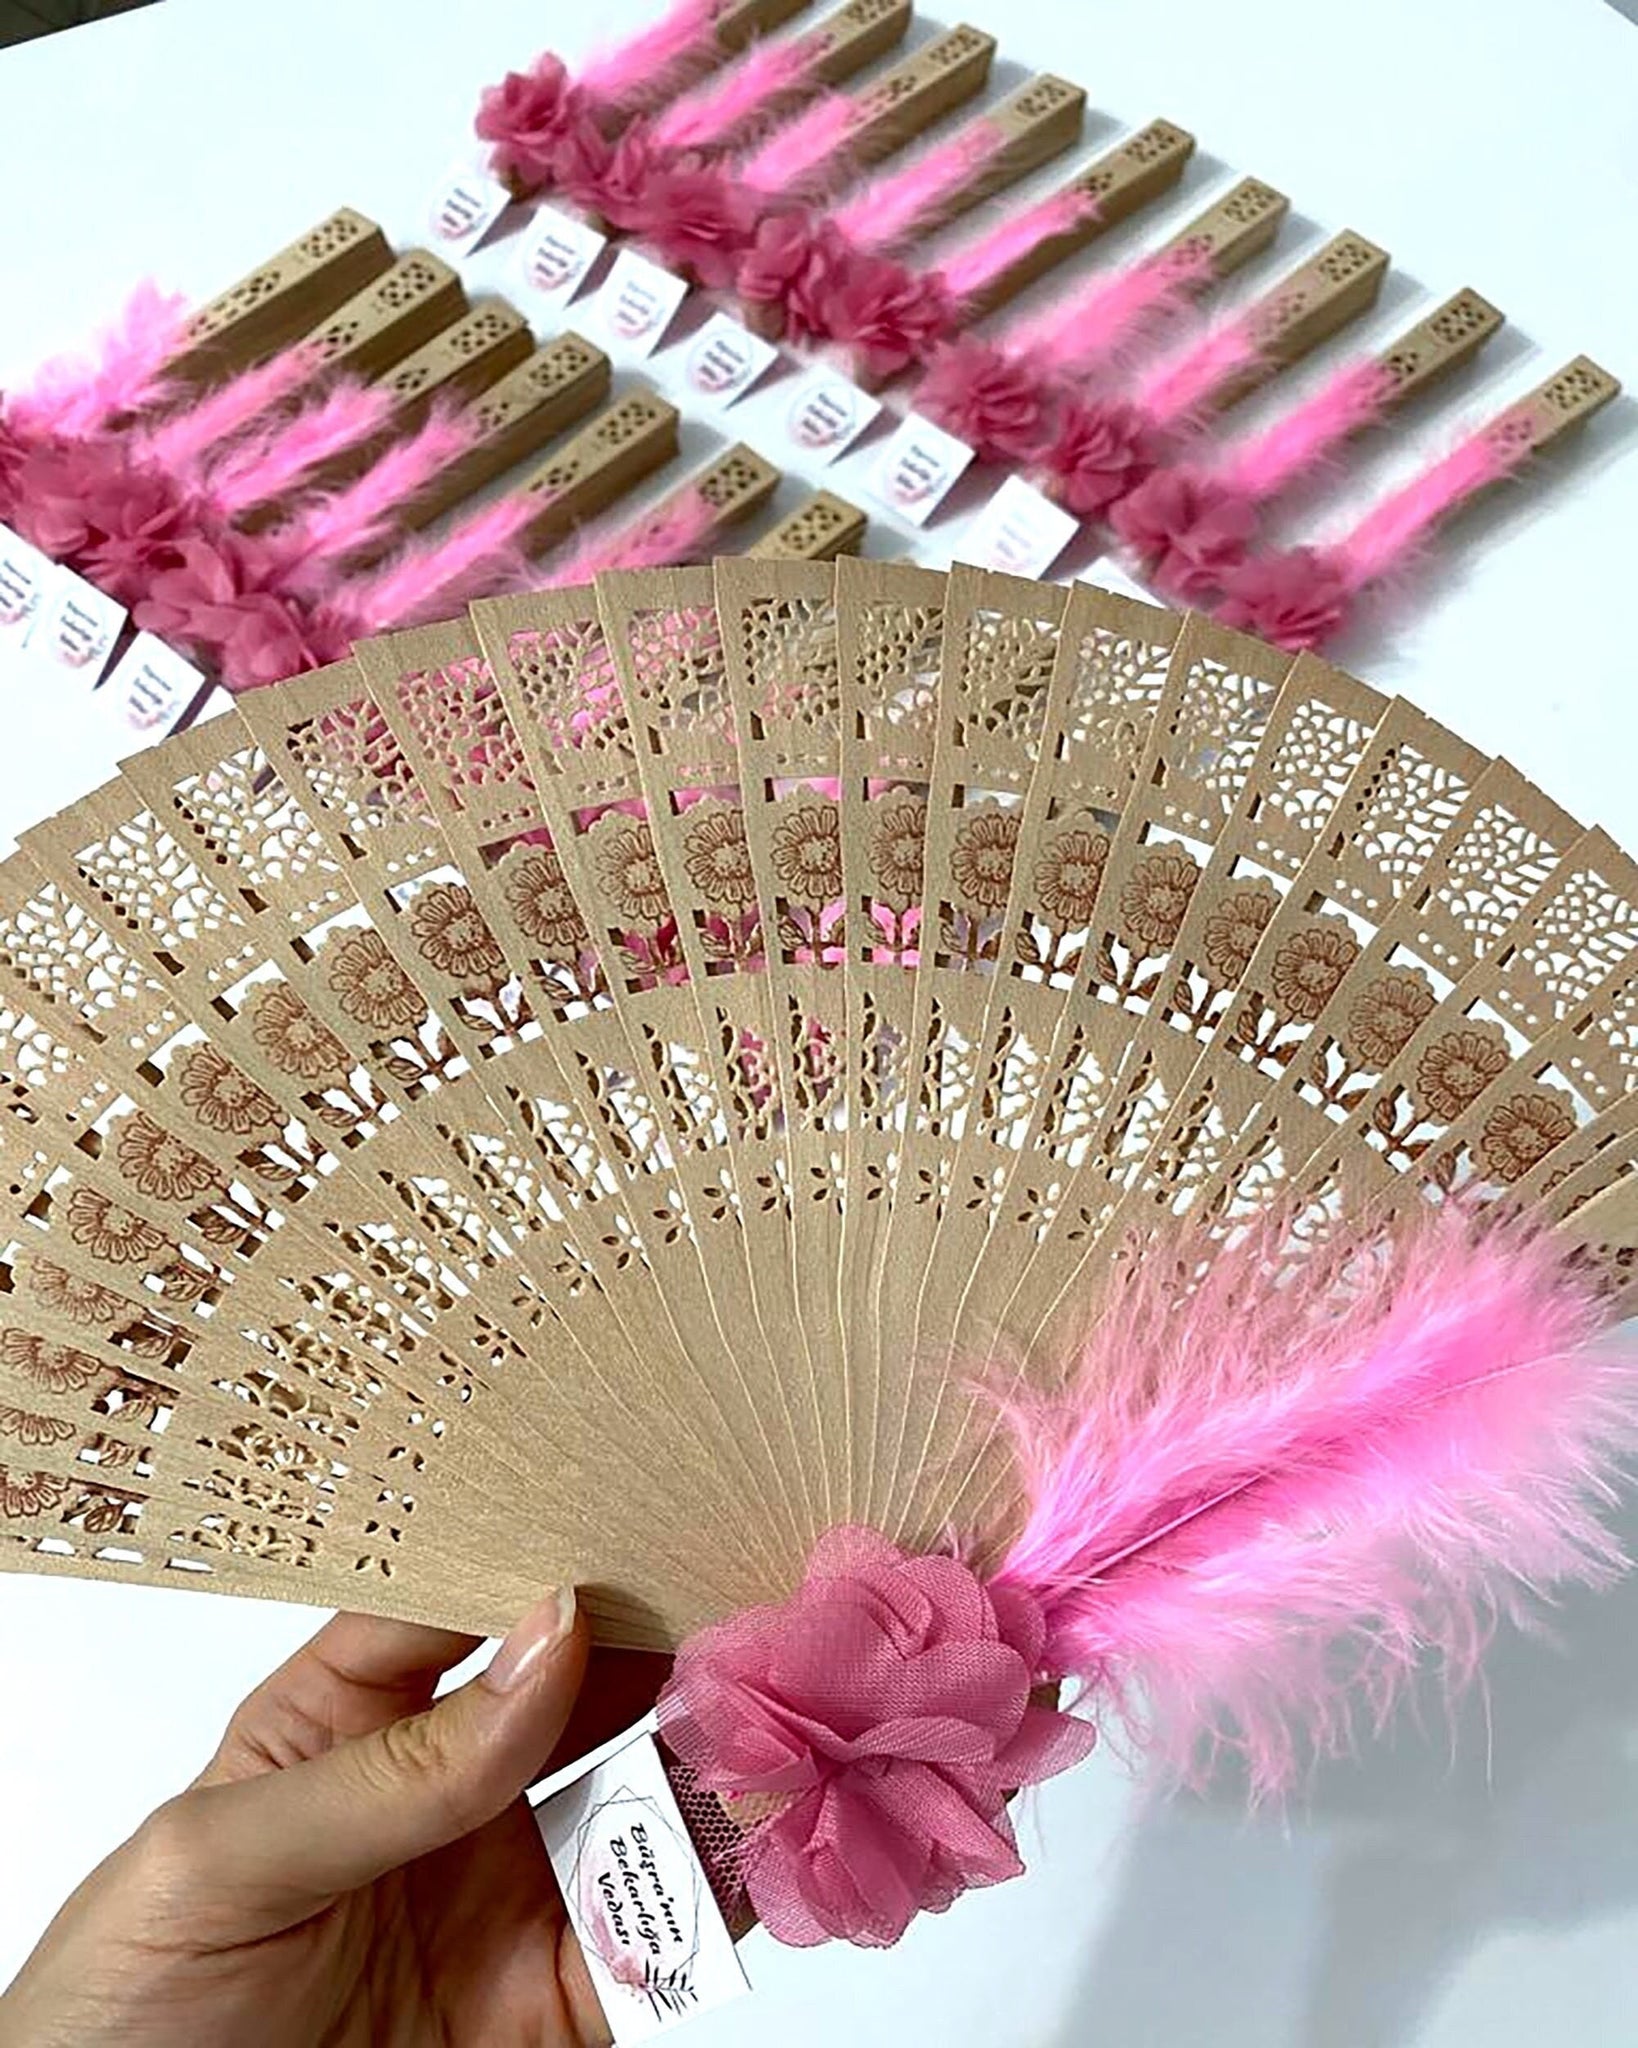 Personalized Natural Wooden Fan Gifts , Hand Fan for Wedding, Rustic Wedding Favors, Bachelorette Party Gifts, Bridesmaid Gifts, Bulk Gifts